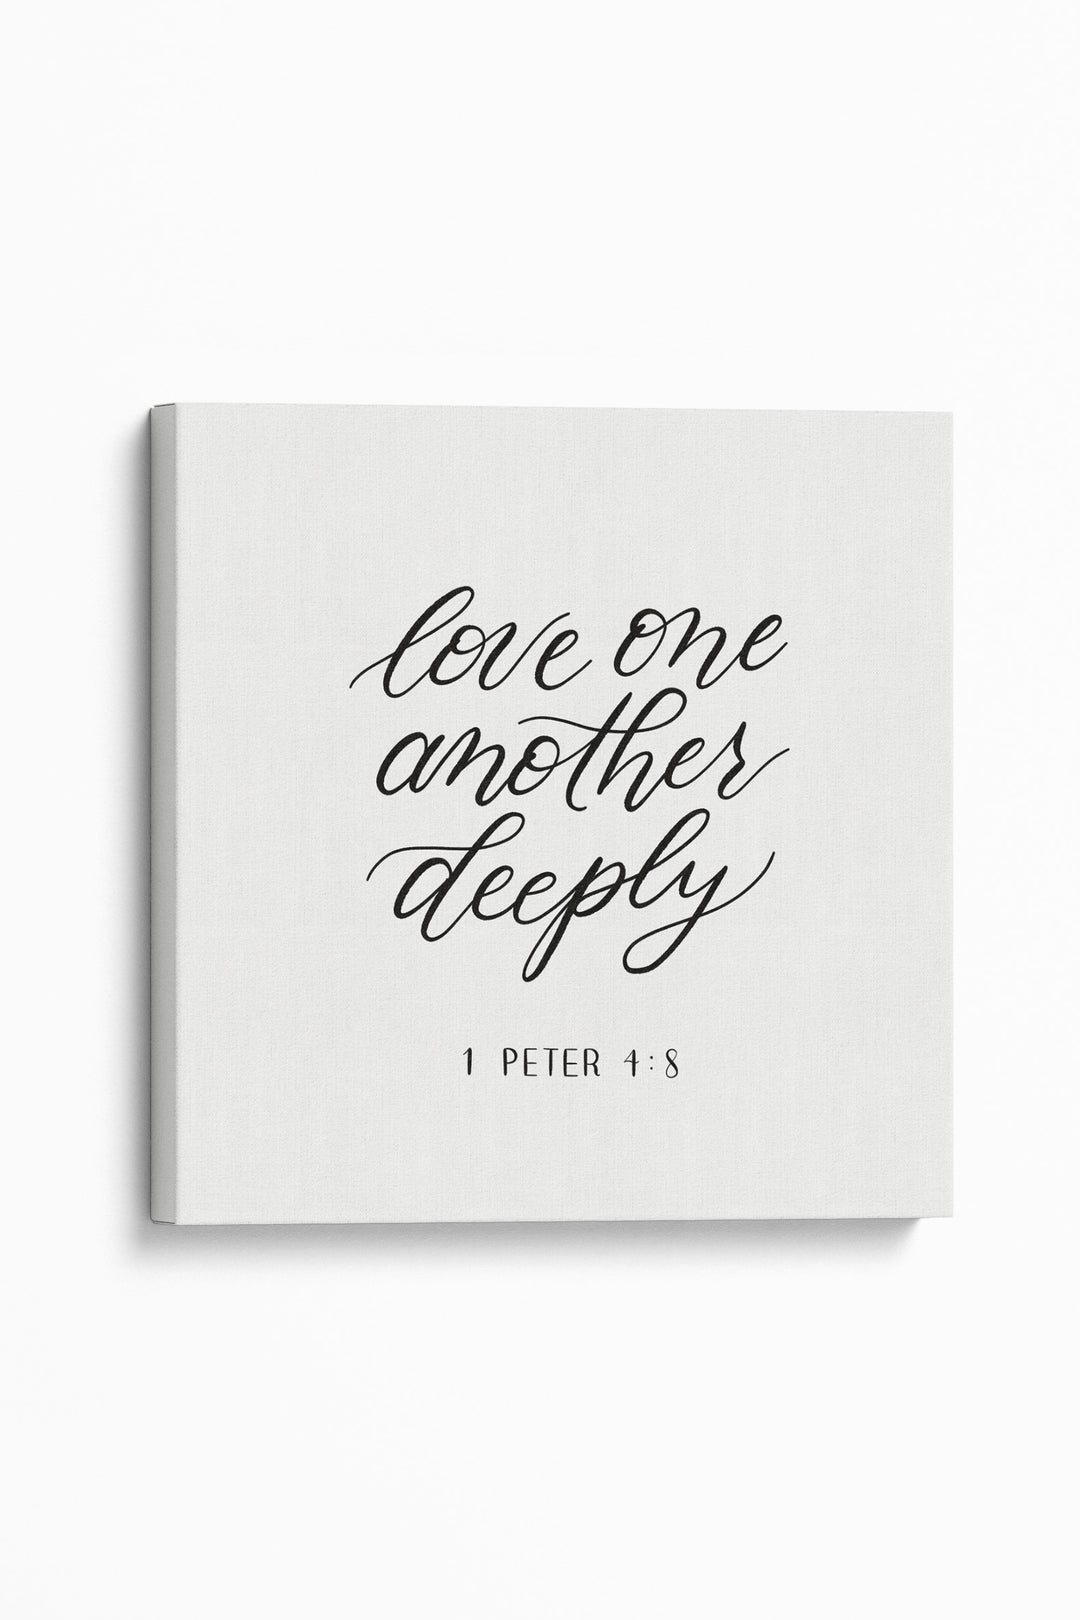 “Love One Another Deeply”